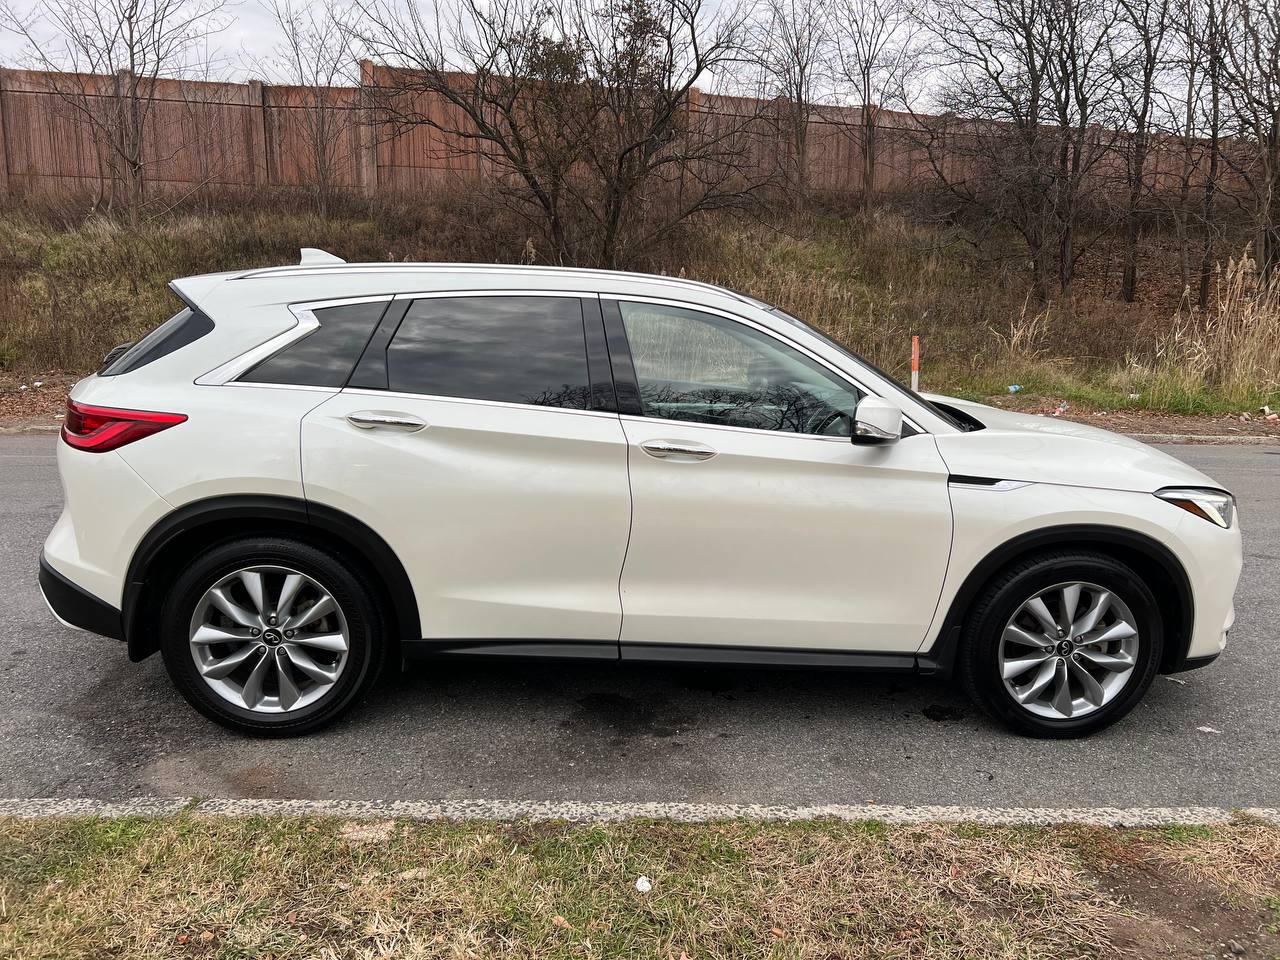 Used - Infiniti QX50 Luxe Wagon for sale in Staten Island NY